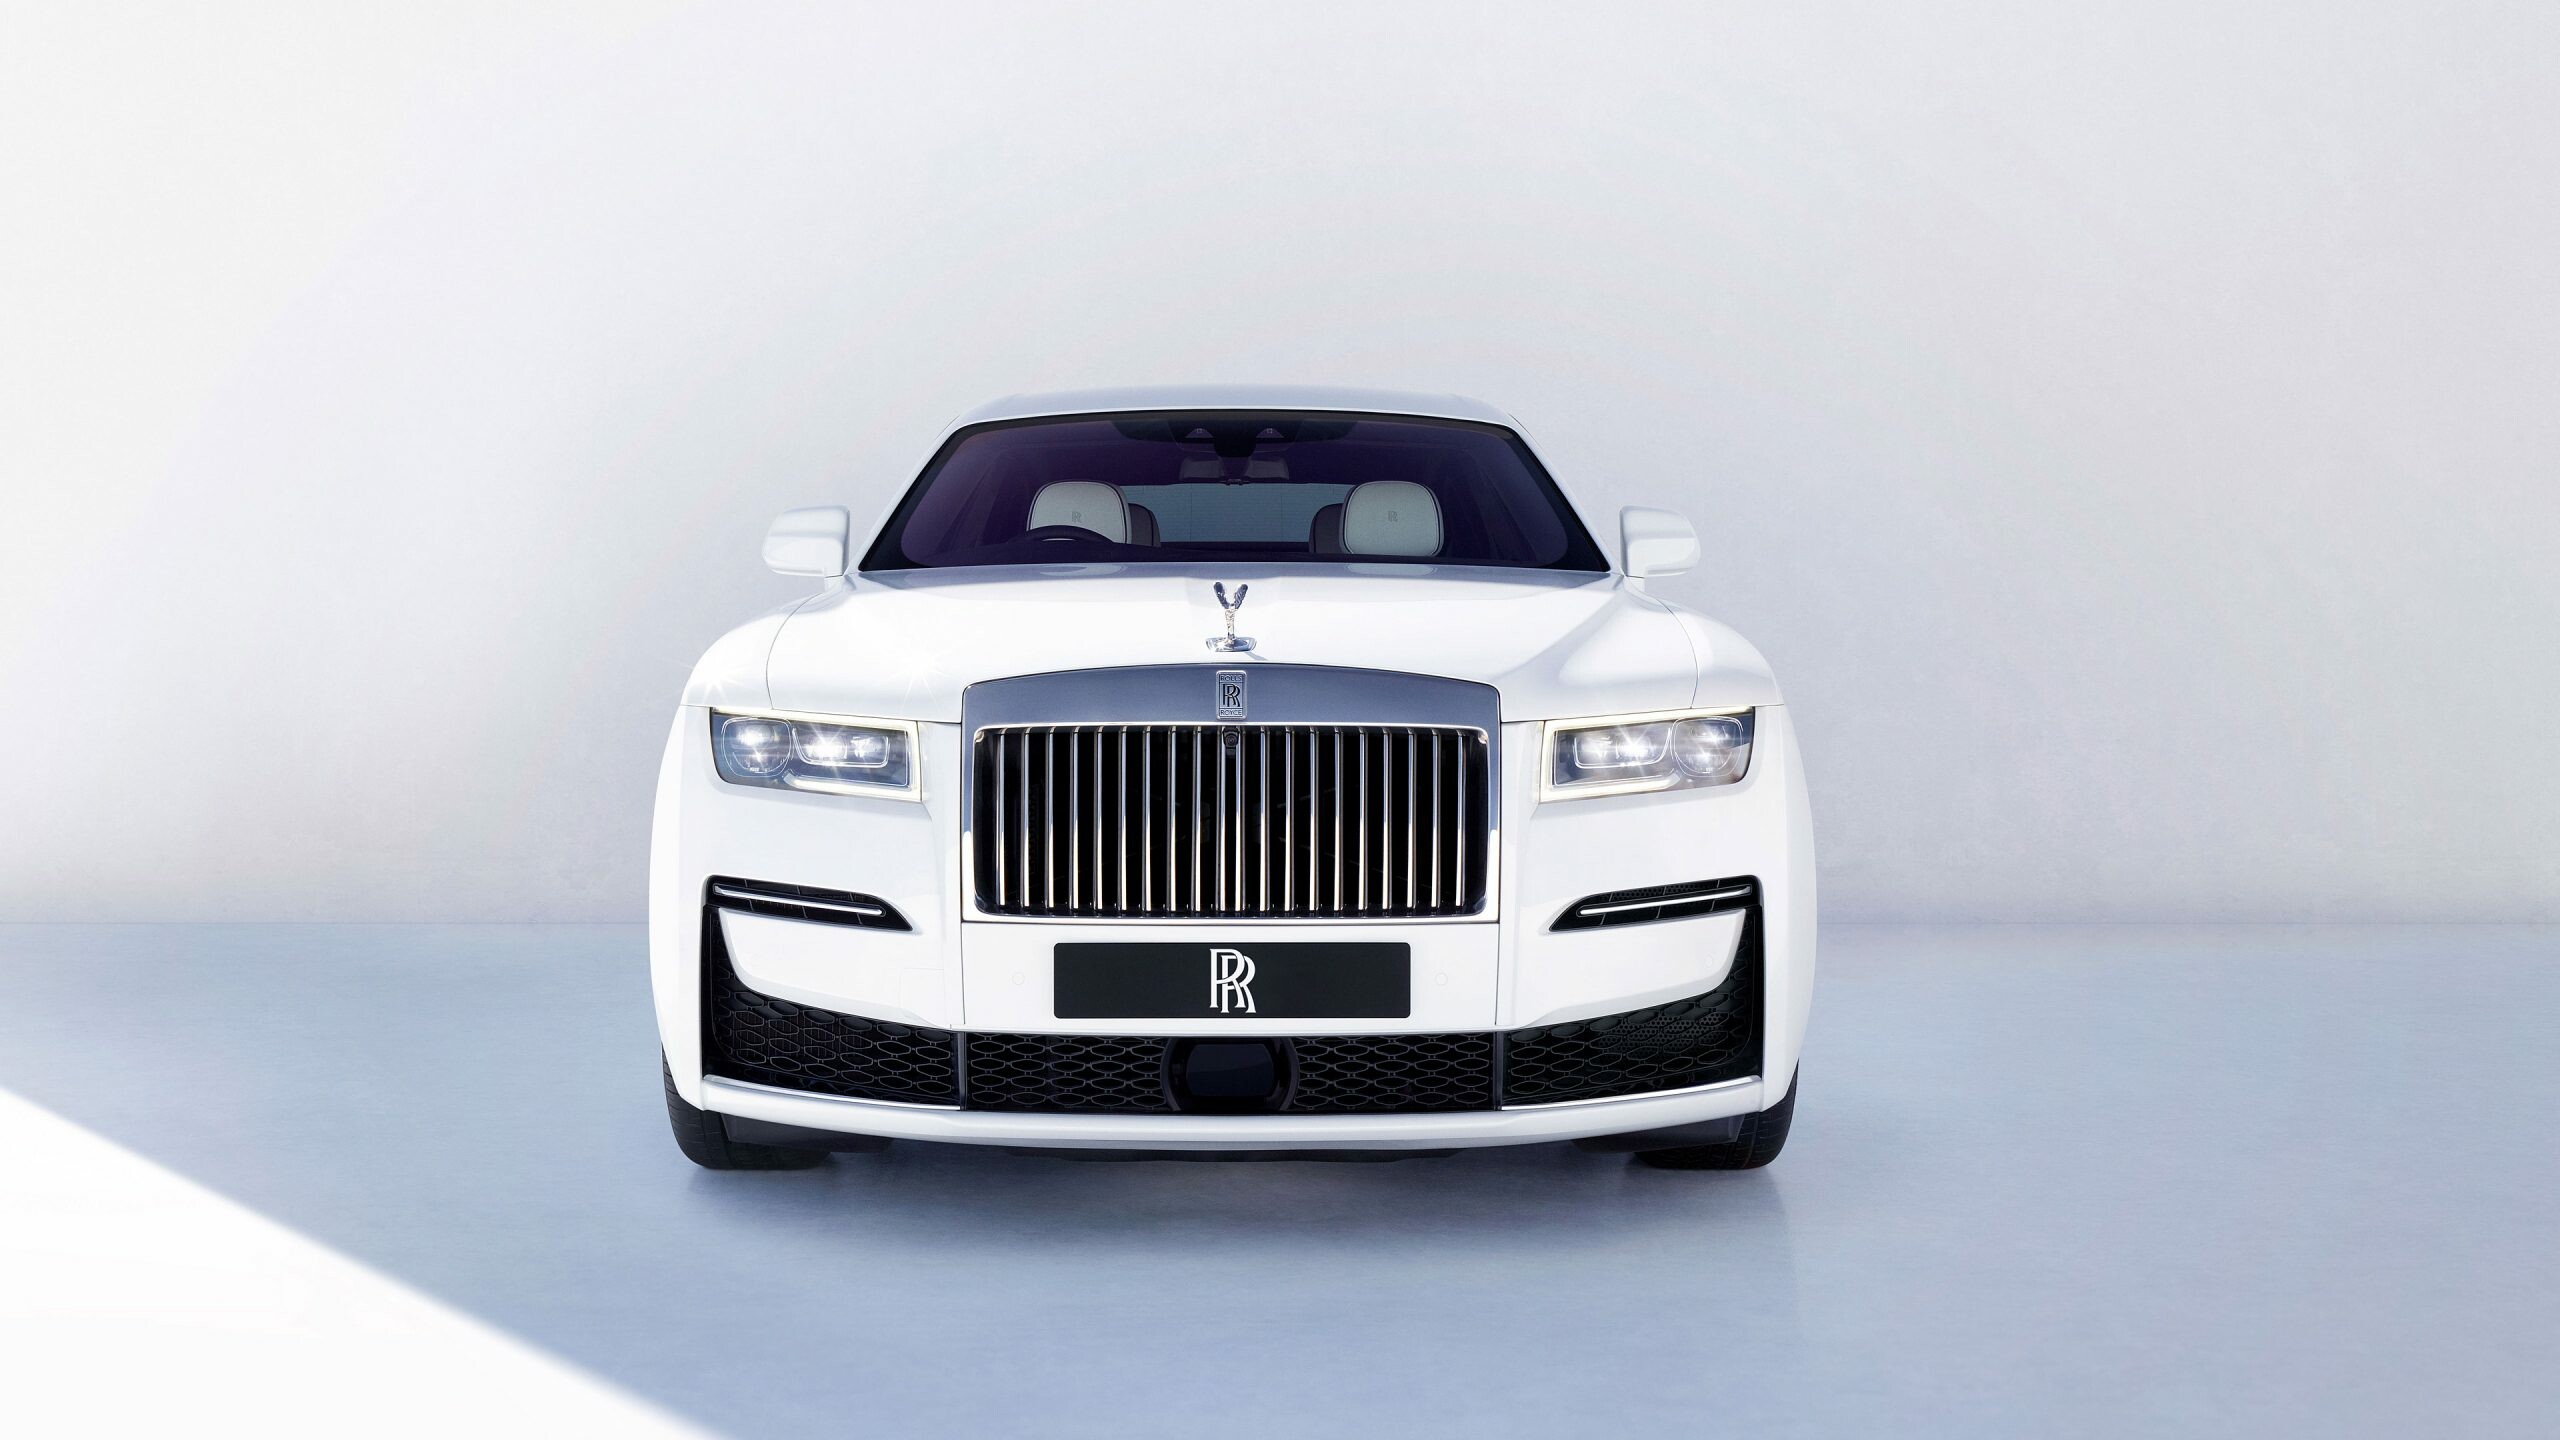 Rolls-Royce: Model Ghost, was announced in April 2009 at the Auto Shanghai show. 2560x1440 HD Background.